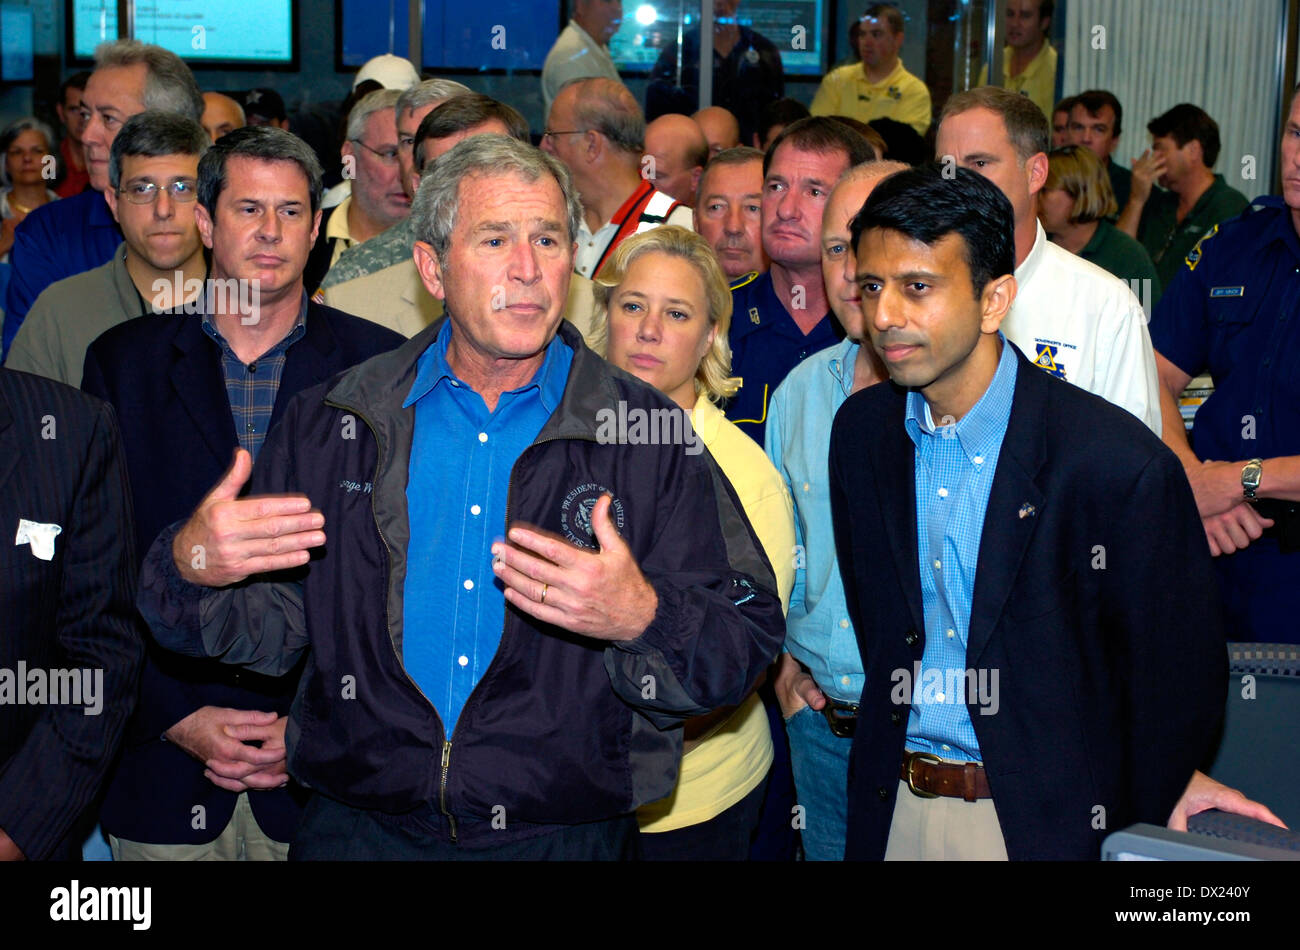 US President George W. Bush discussed the joint federal and state response to Hurricane Gustav with the press and emergency operations staff at the Governor's Office of Homeland Security & Emergency Preparedness September 4, 2009 in Baton Rouge, Louisiana. Joining Bush in the briefing was Louisiana Governor Bobby Jindal, right, and Louisiana Senators David Vitter, left, and Mary Landrieu. Stock Photo